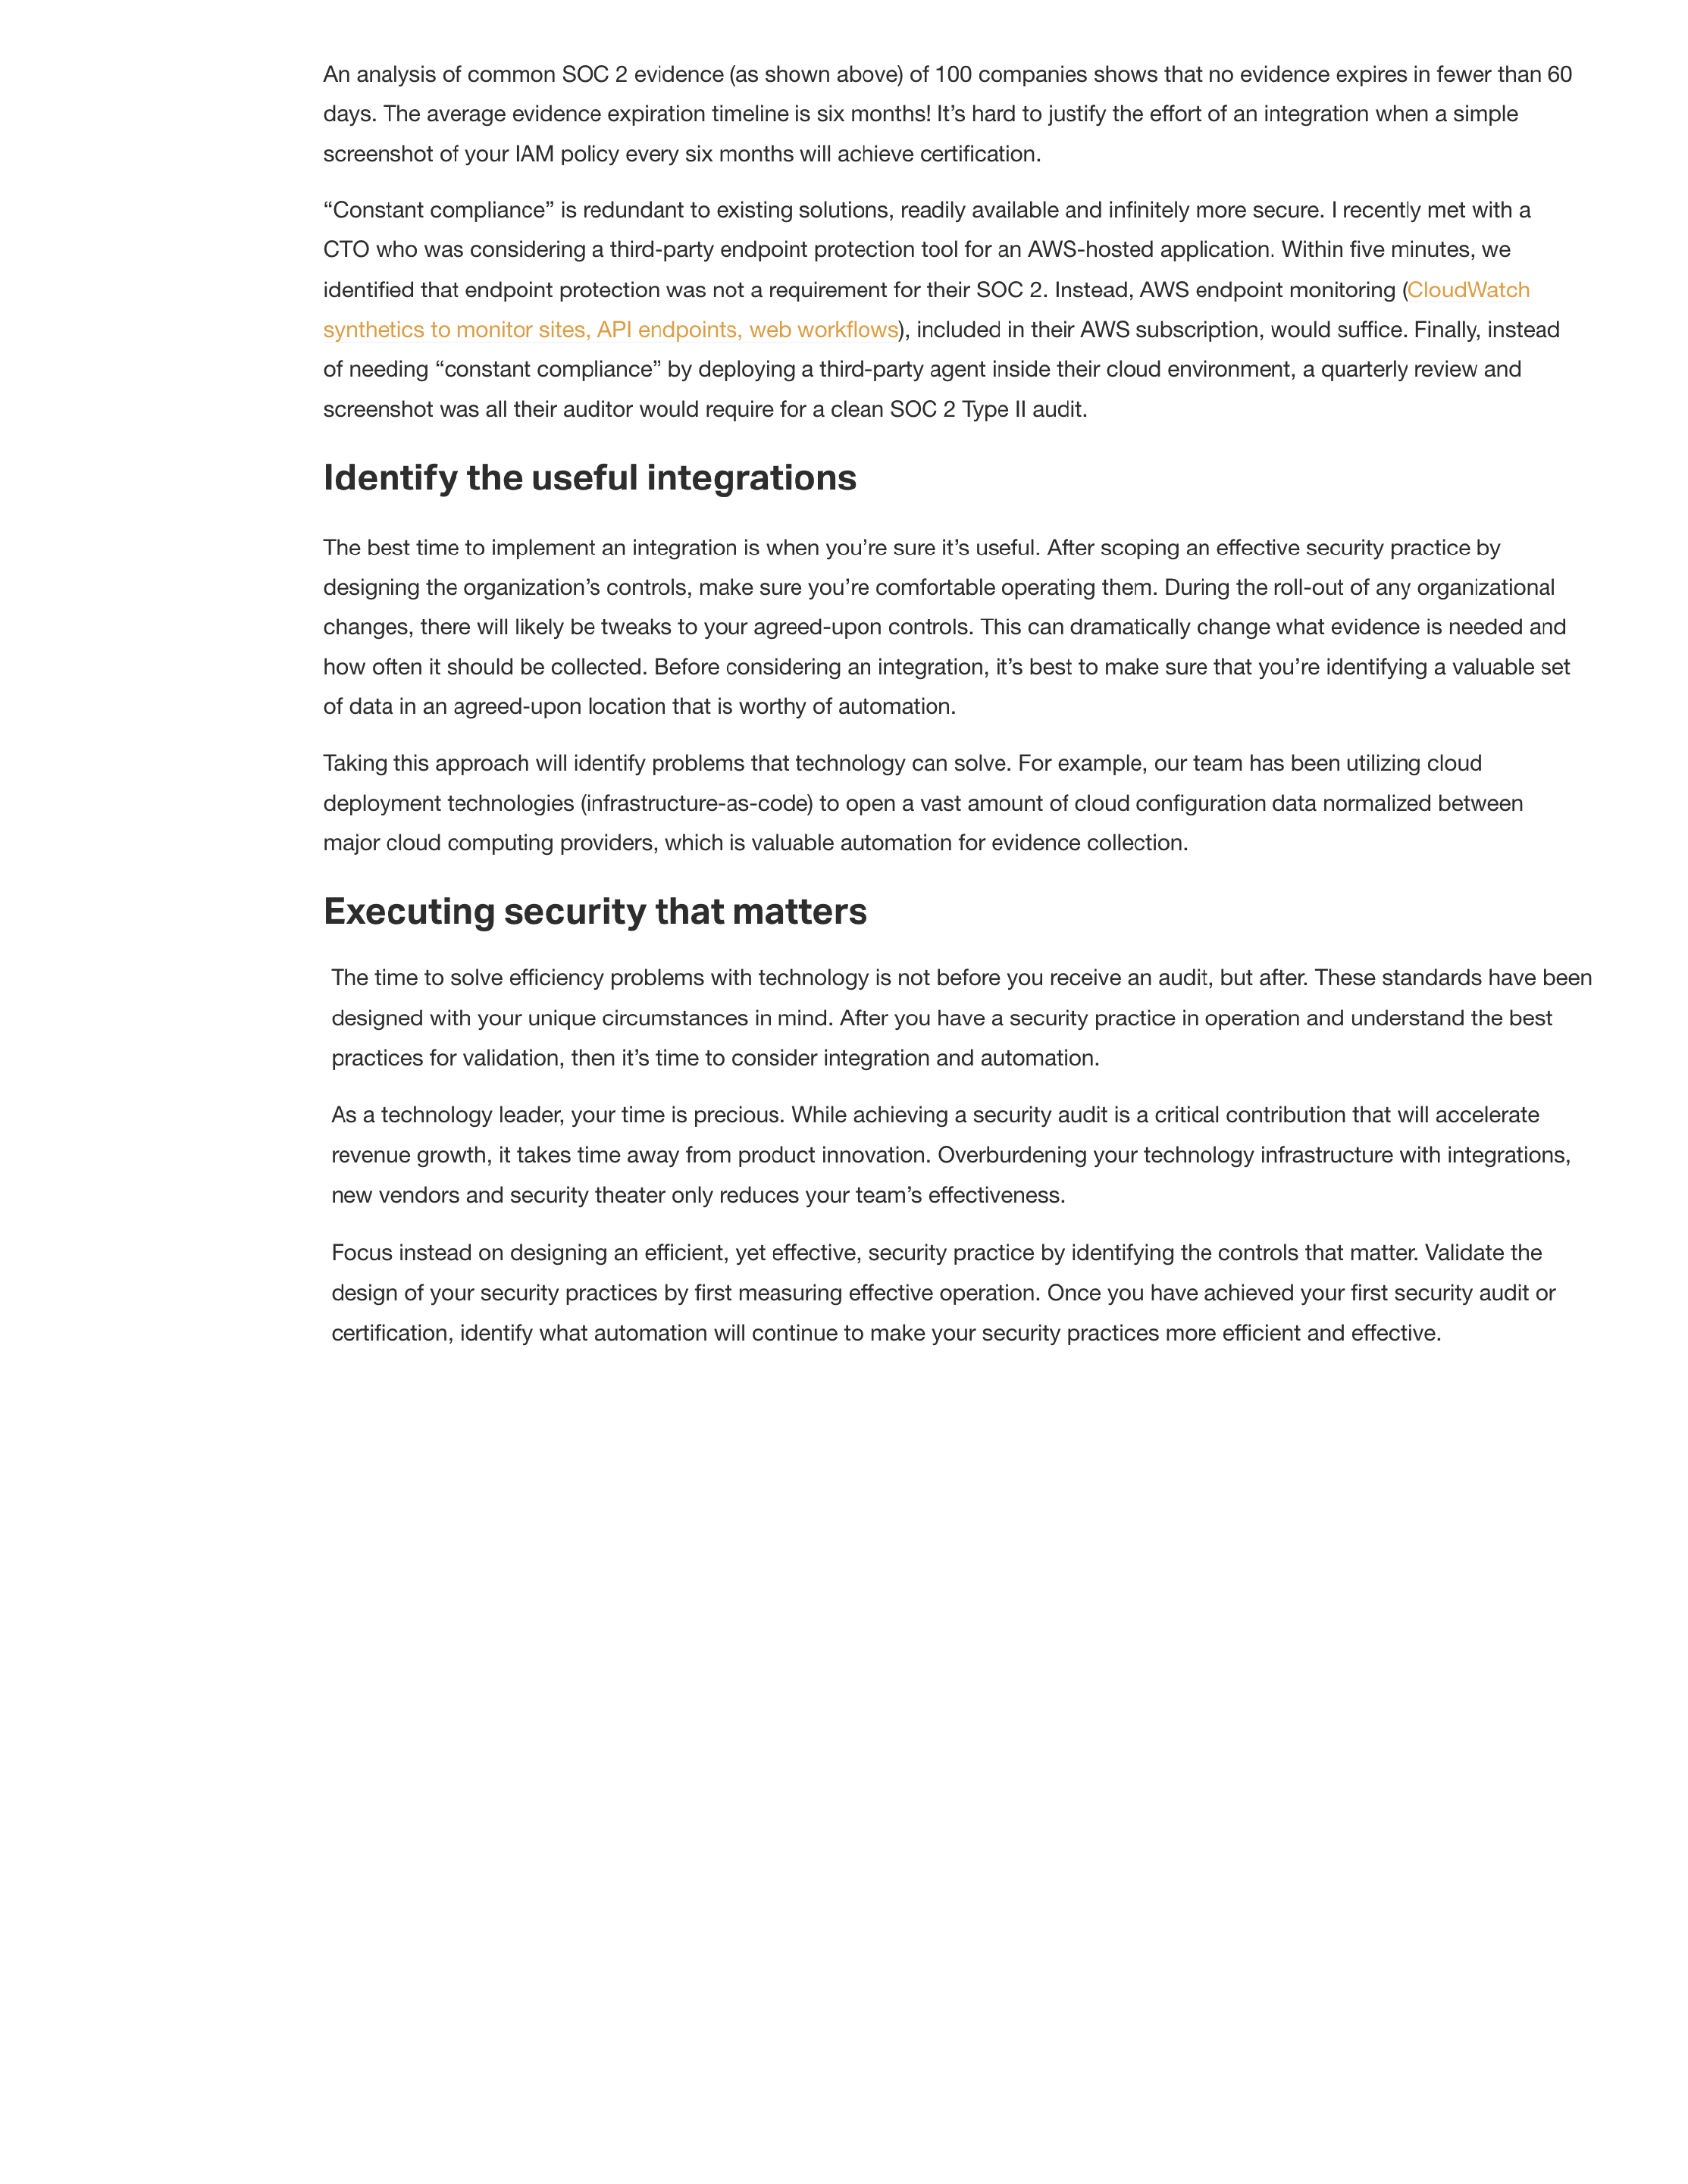 TechCrunch-Constant Compliance_Page_3